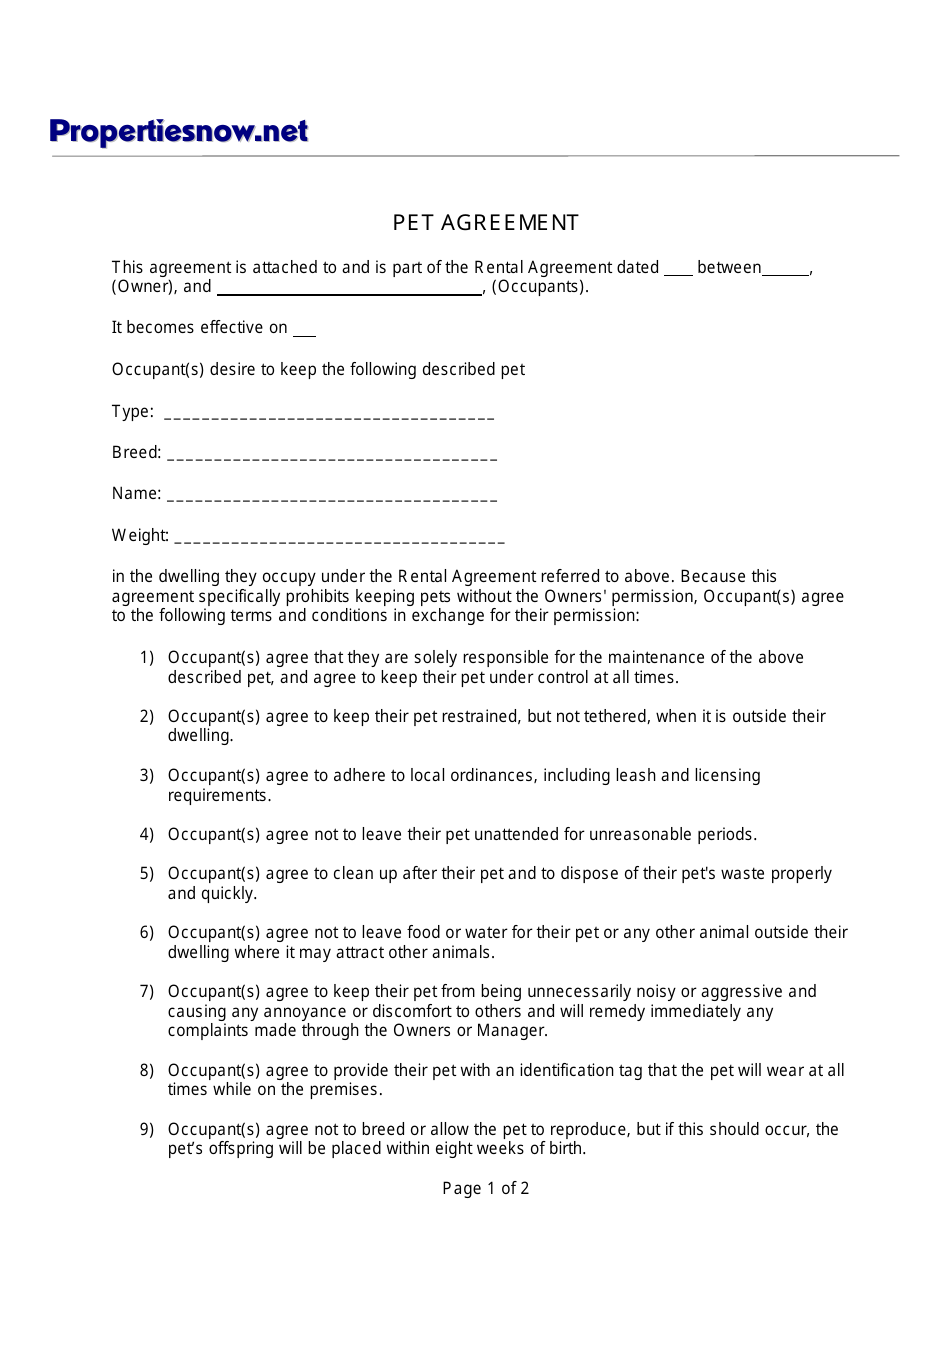 pet-agreement-form-seventeen-points-fill-out-sign-online-and